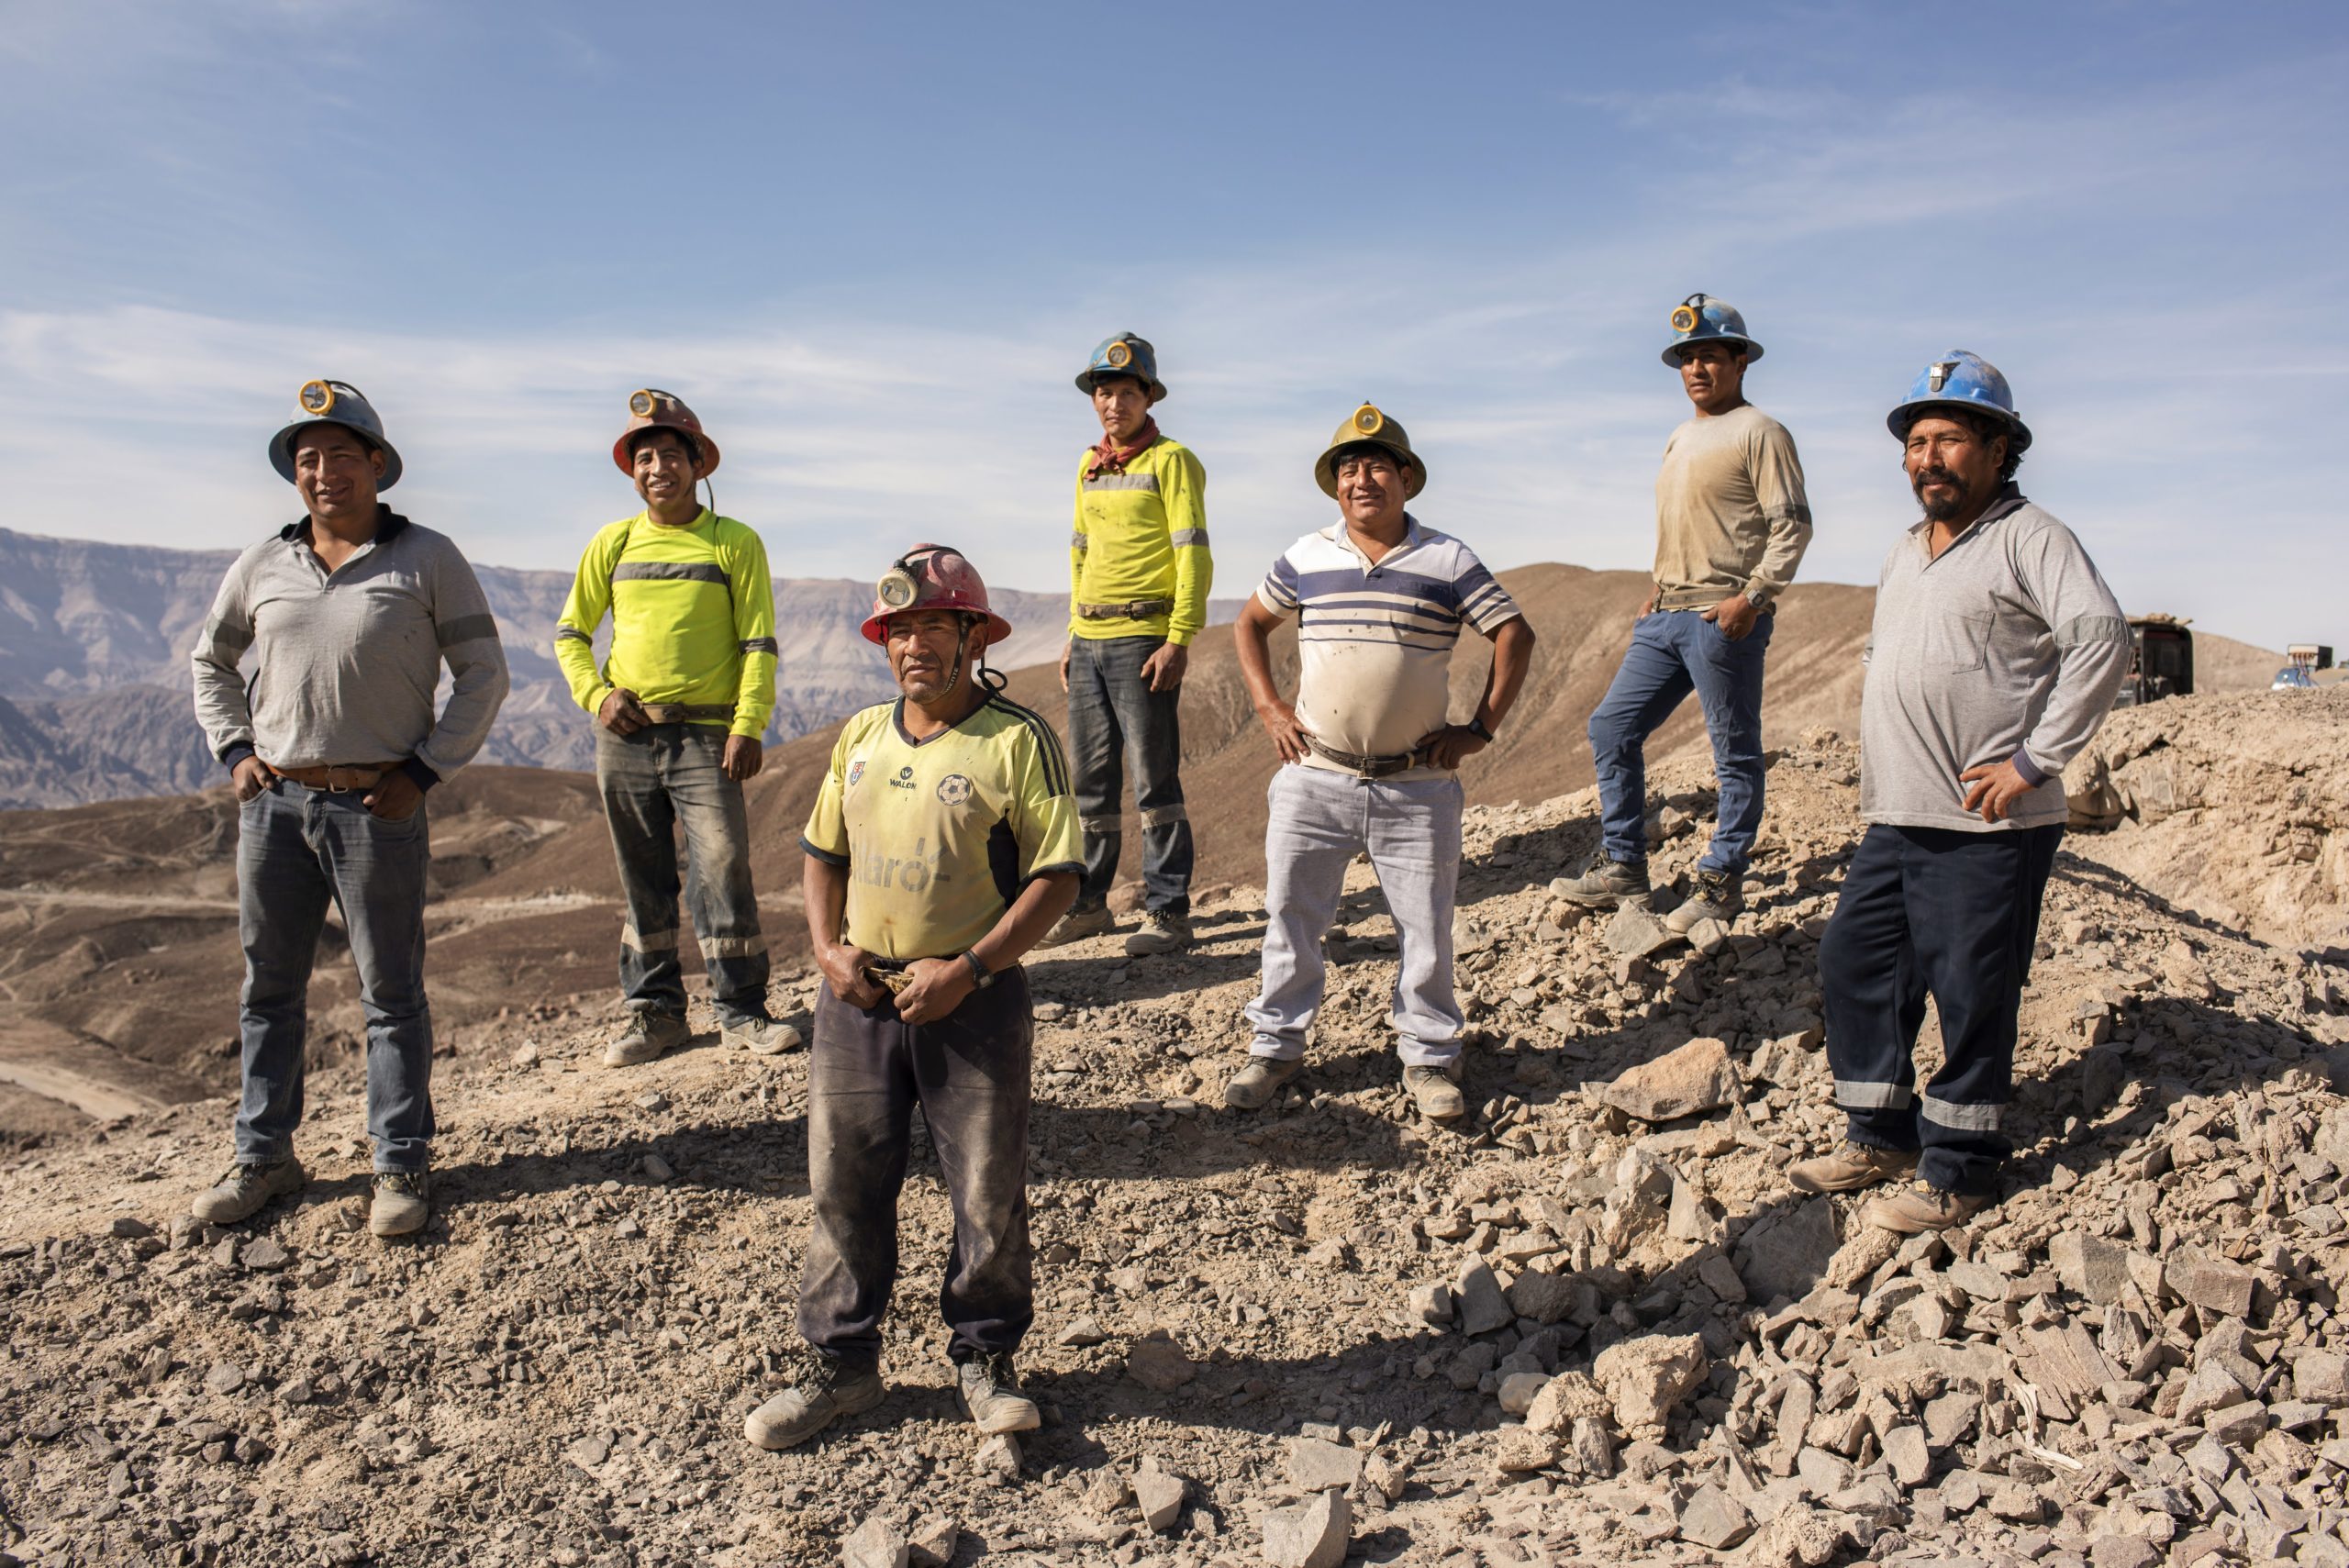 Small-scale miners associated with Proyecto Revaloro in Century Mining located in the district of Ocaña, Arequipa, Perú.